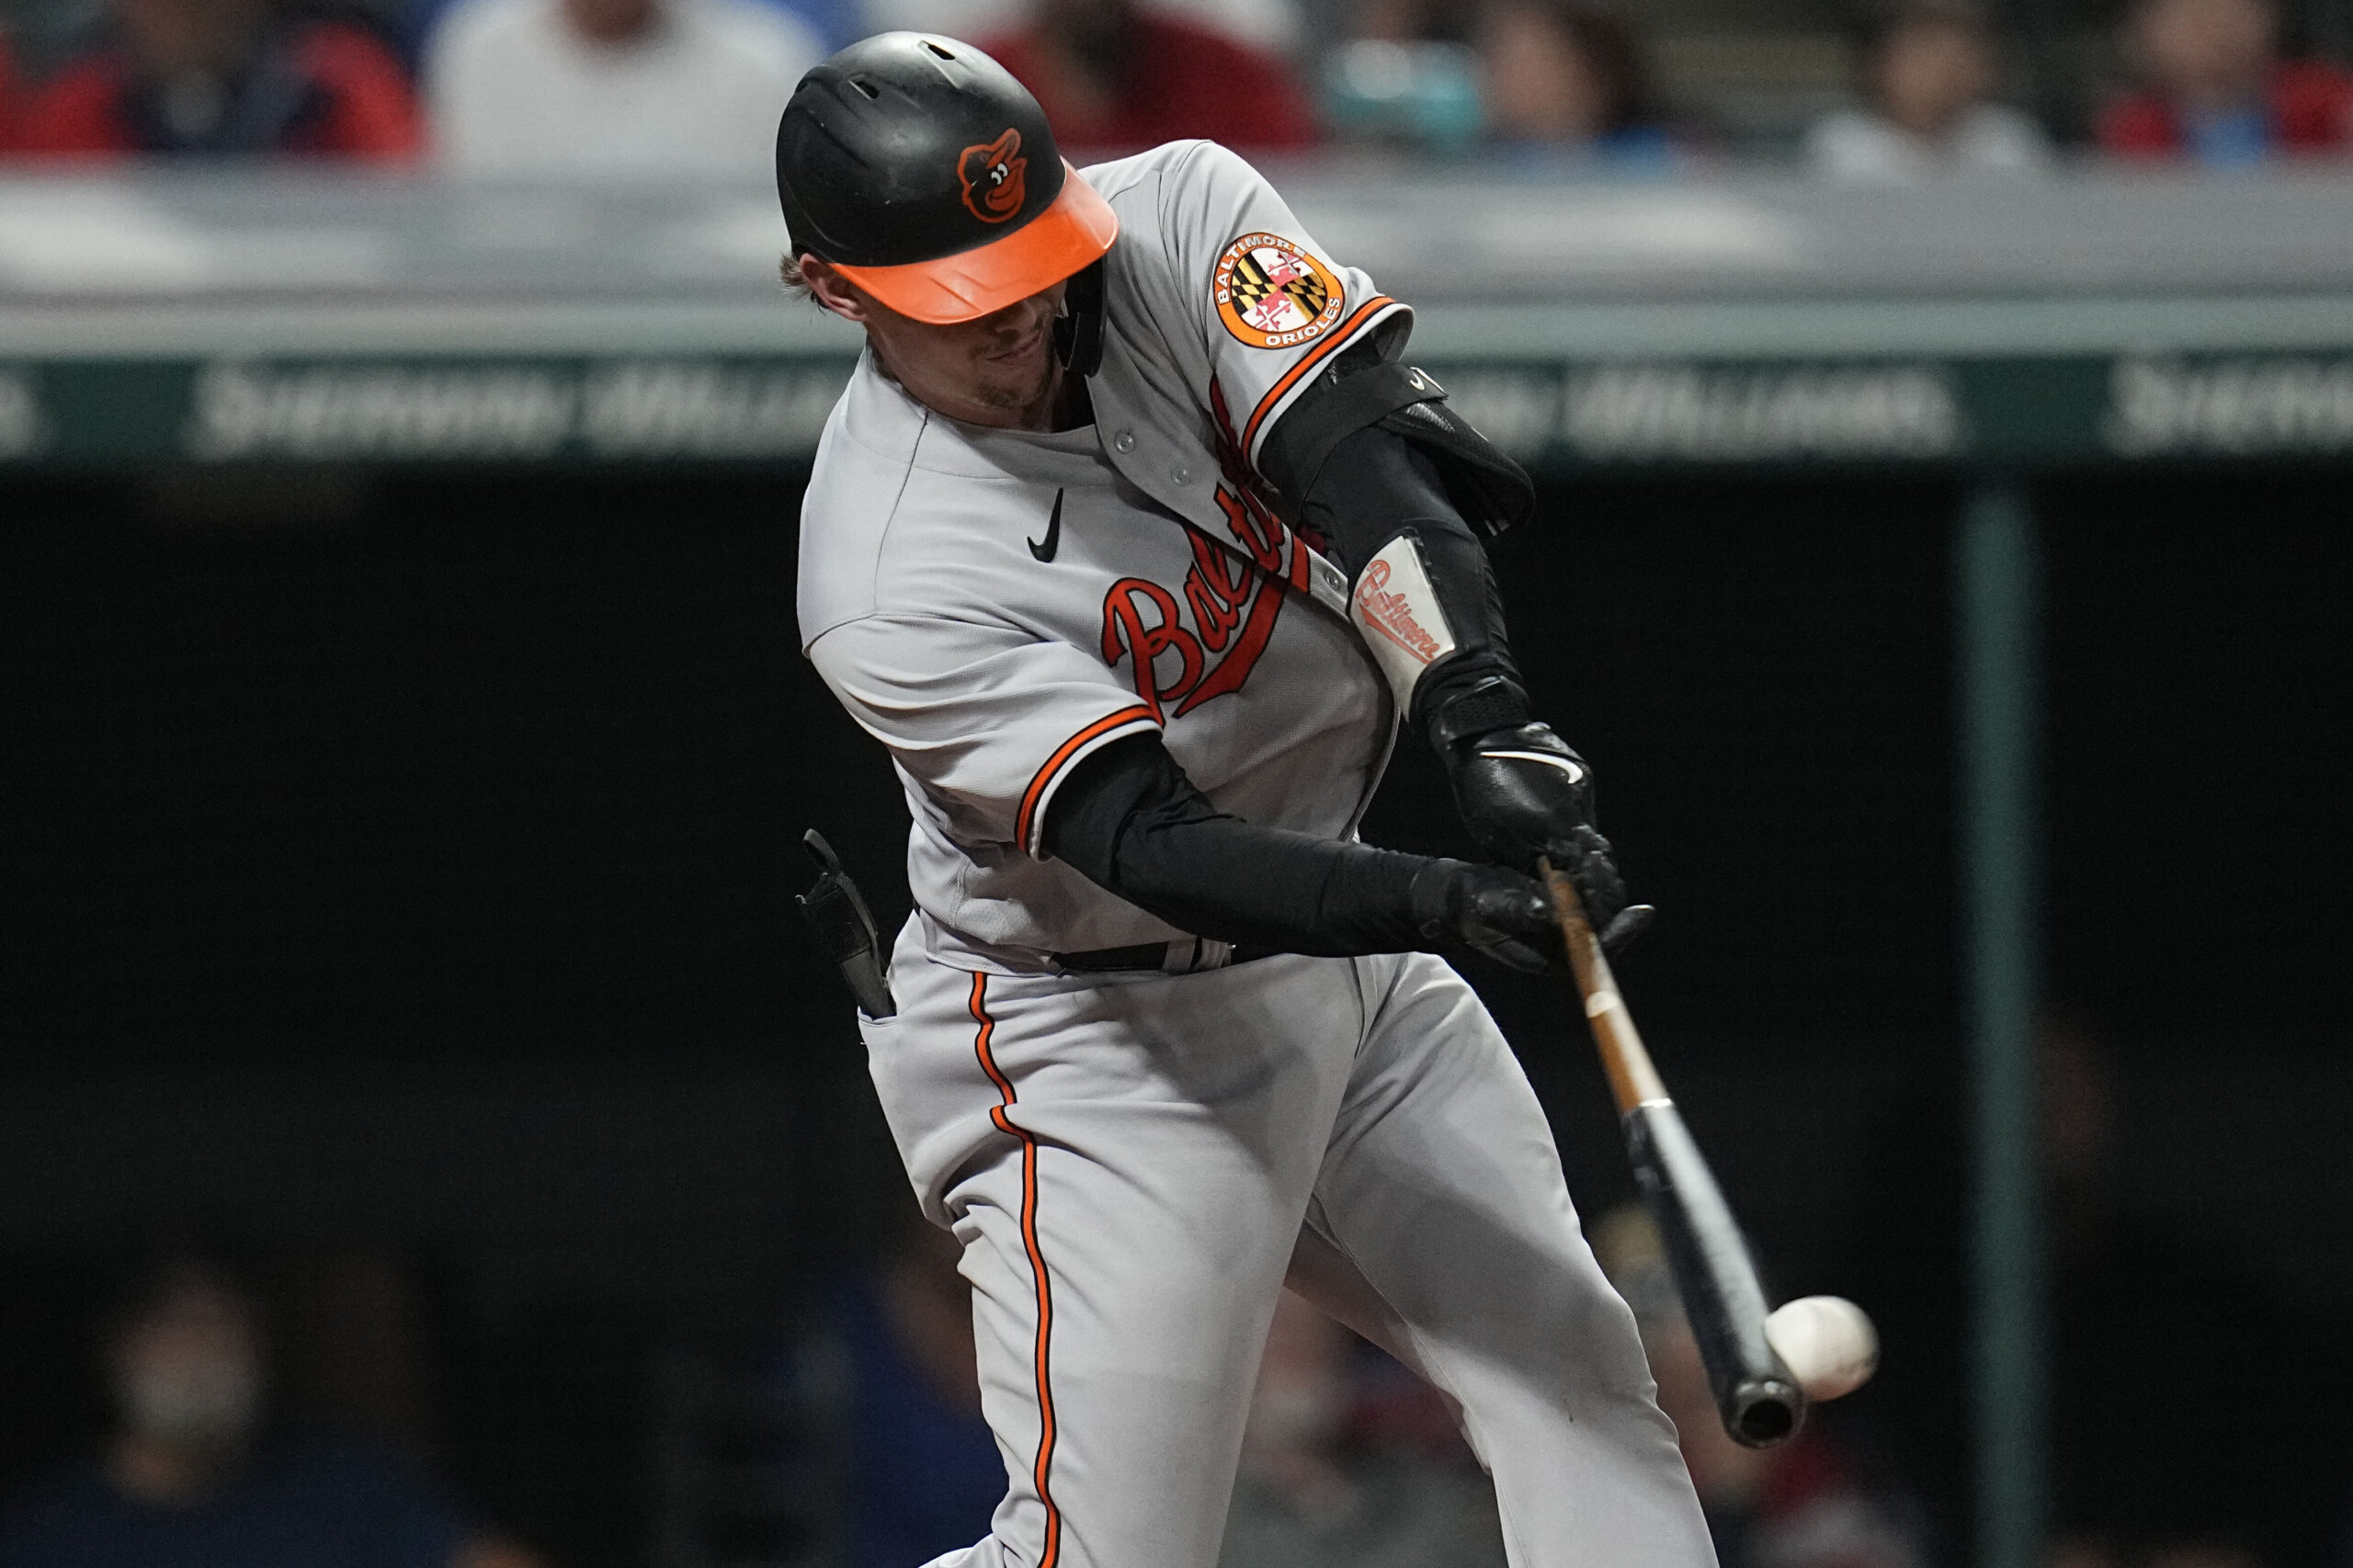 Orioles place 1B Mountcastle on 10-day IL with shoulder inflammation